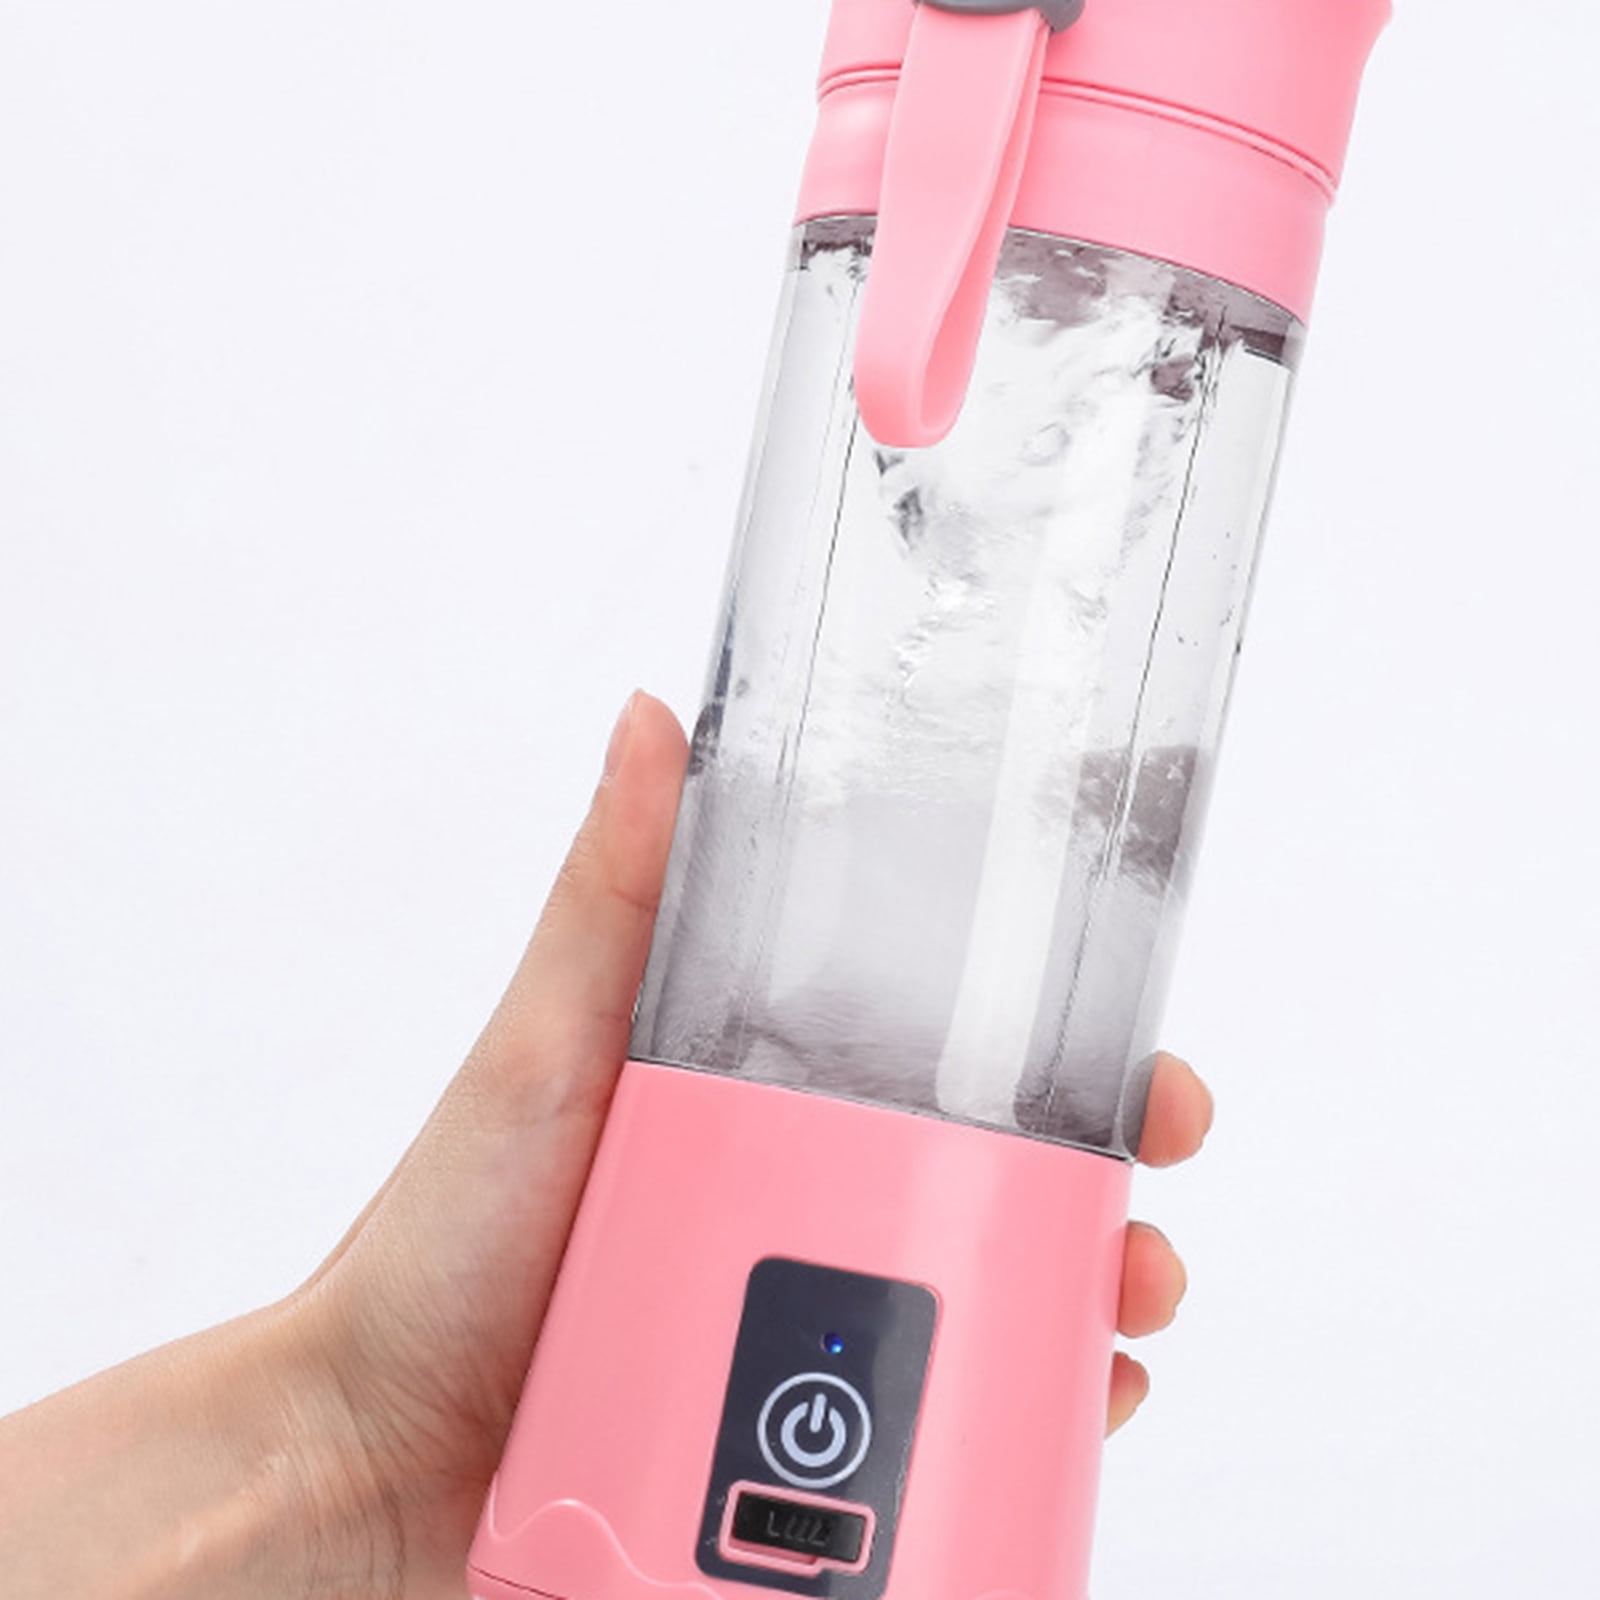 TENSWALL Fruit Juicer Cup KSQ-A1 Portable Blender Pink - NEW - Open Box 